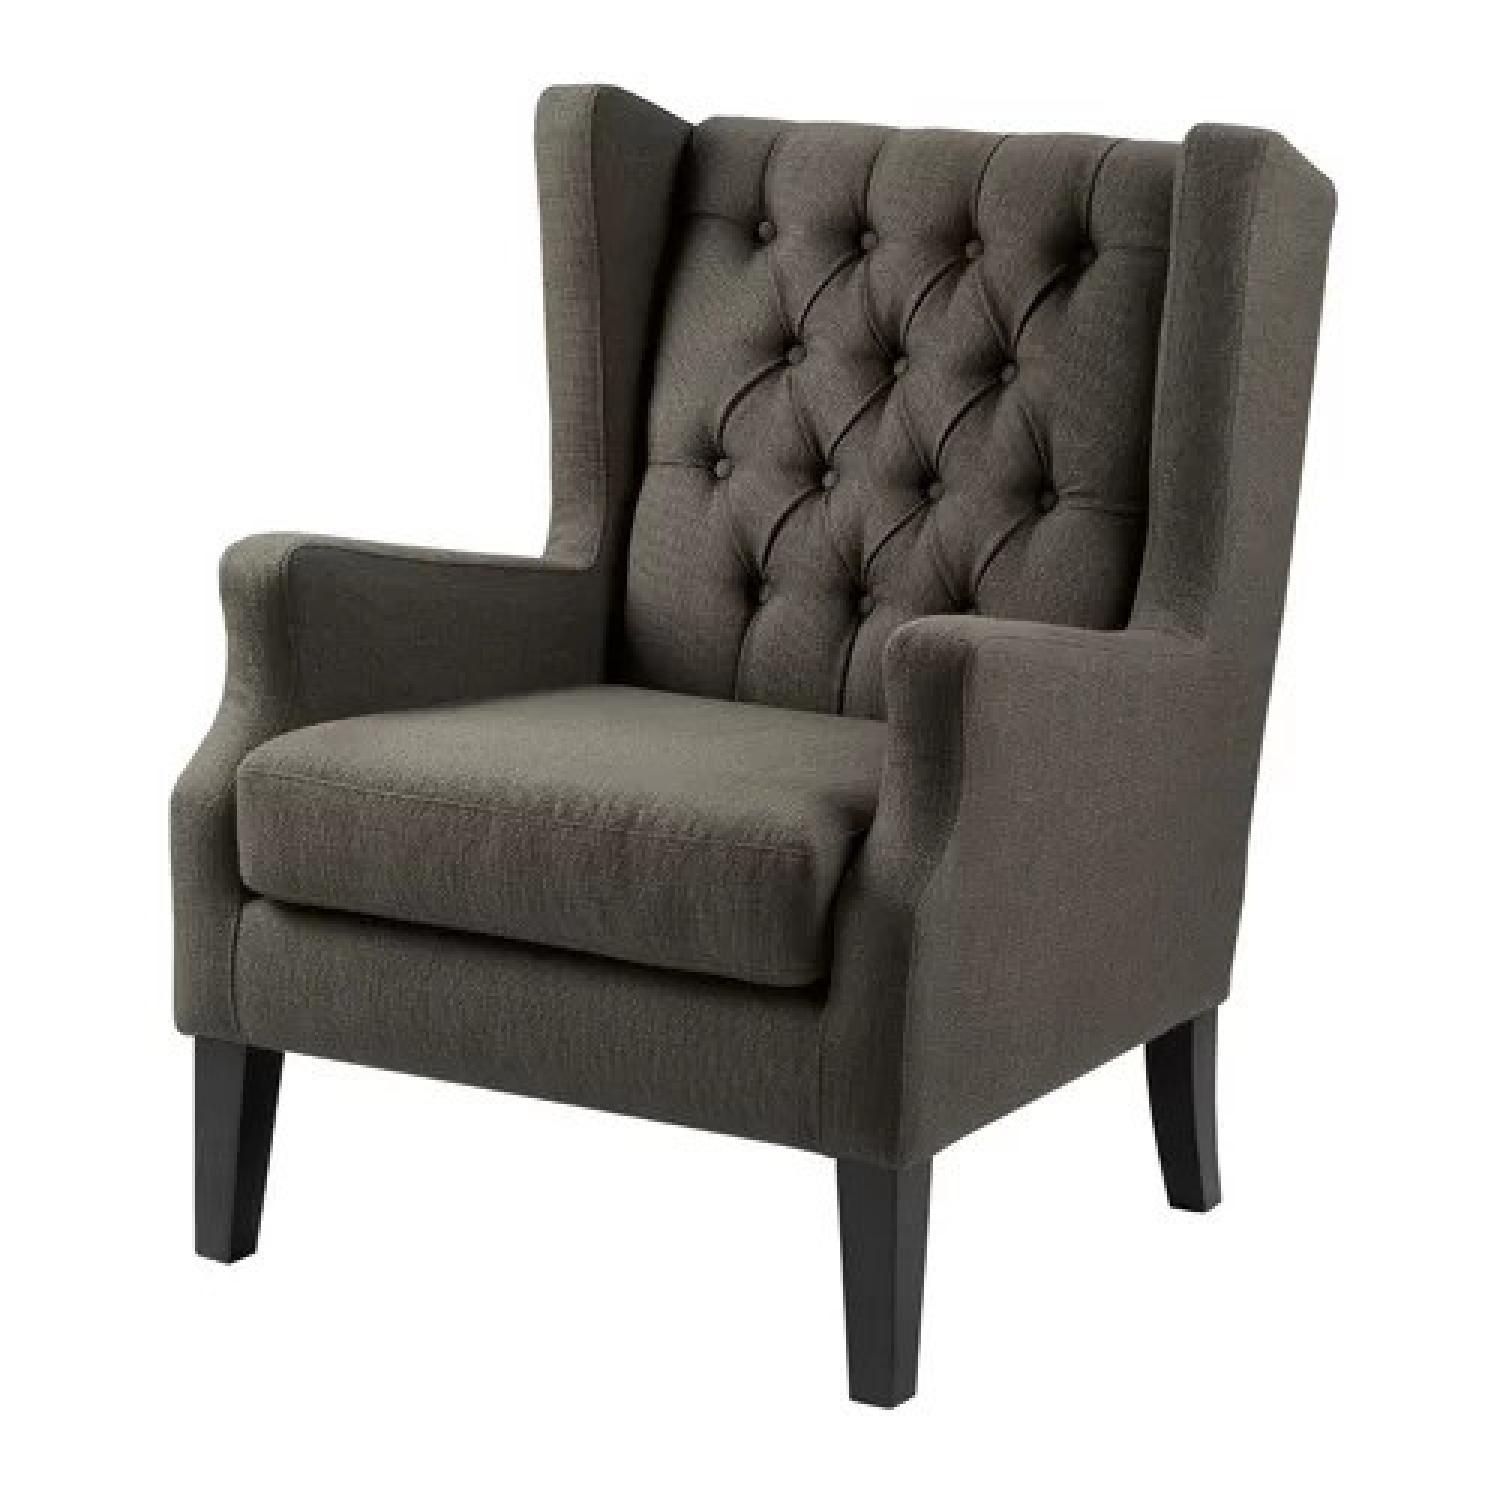 Threes Post Allis Wingback Chair Within Allis Tufted Polyester Blend Wingback Chairs (View 3 of 15)